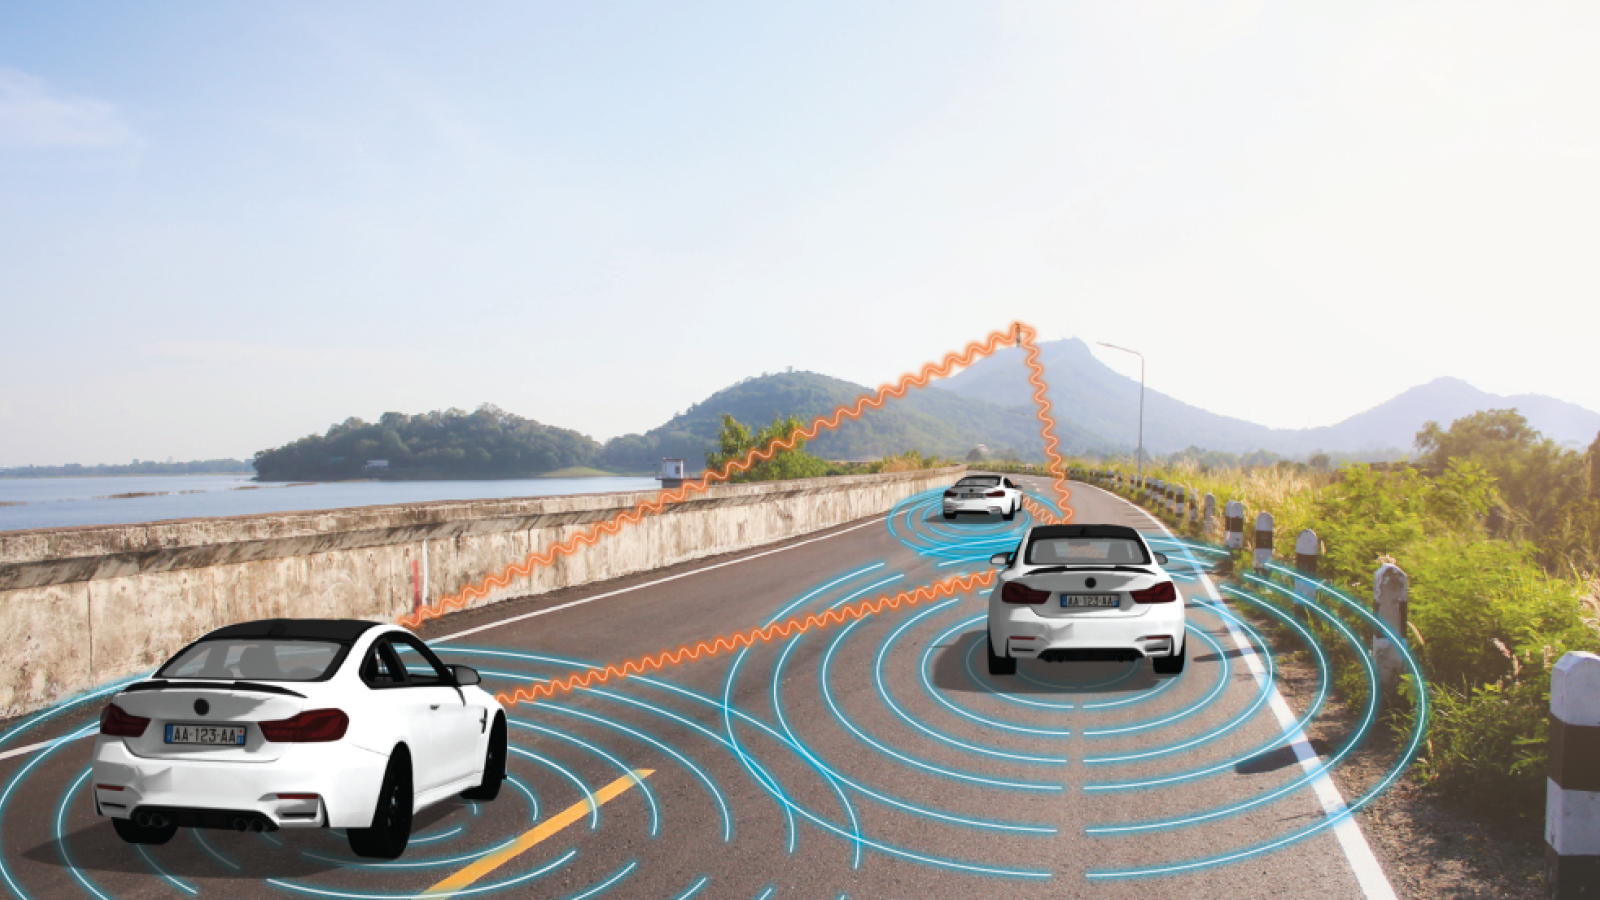 An illustration of two self-driving cars detecting nearby objects and sharing sensor data using the same radio-frequency band.